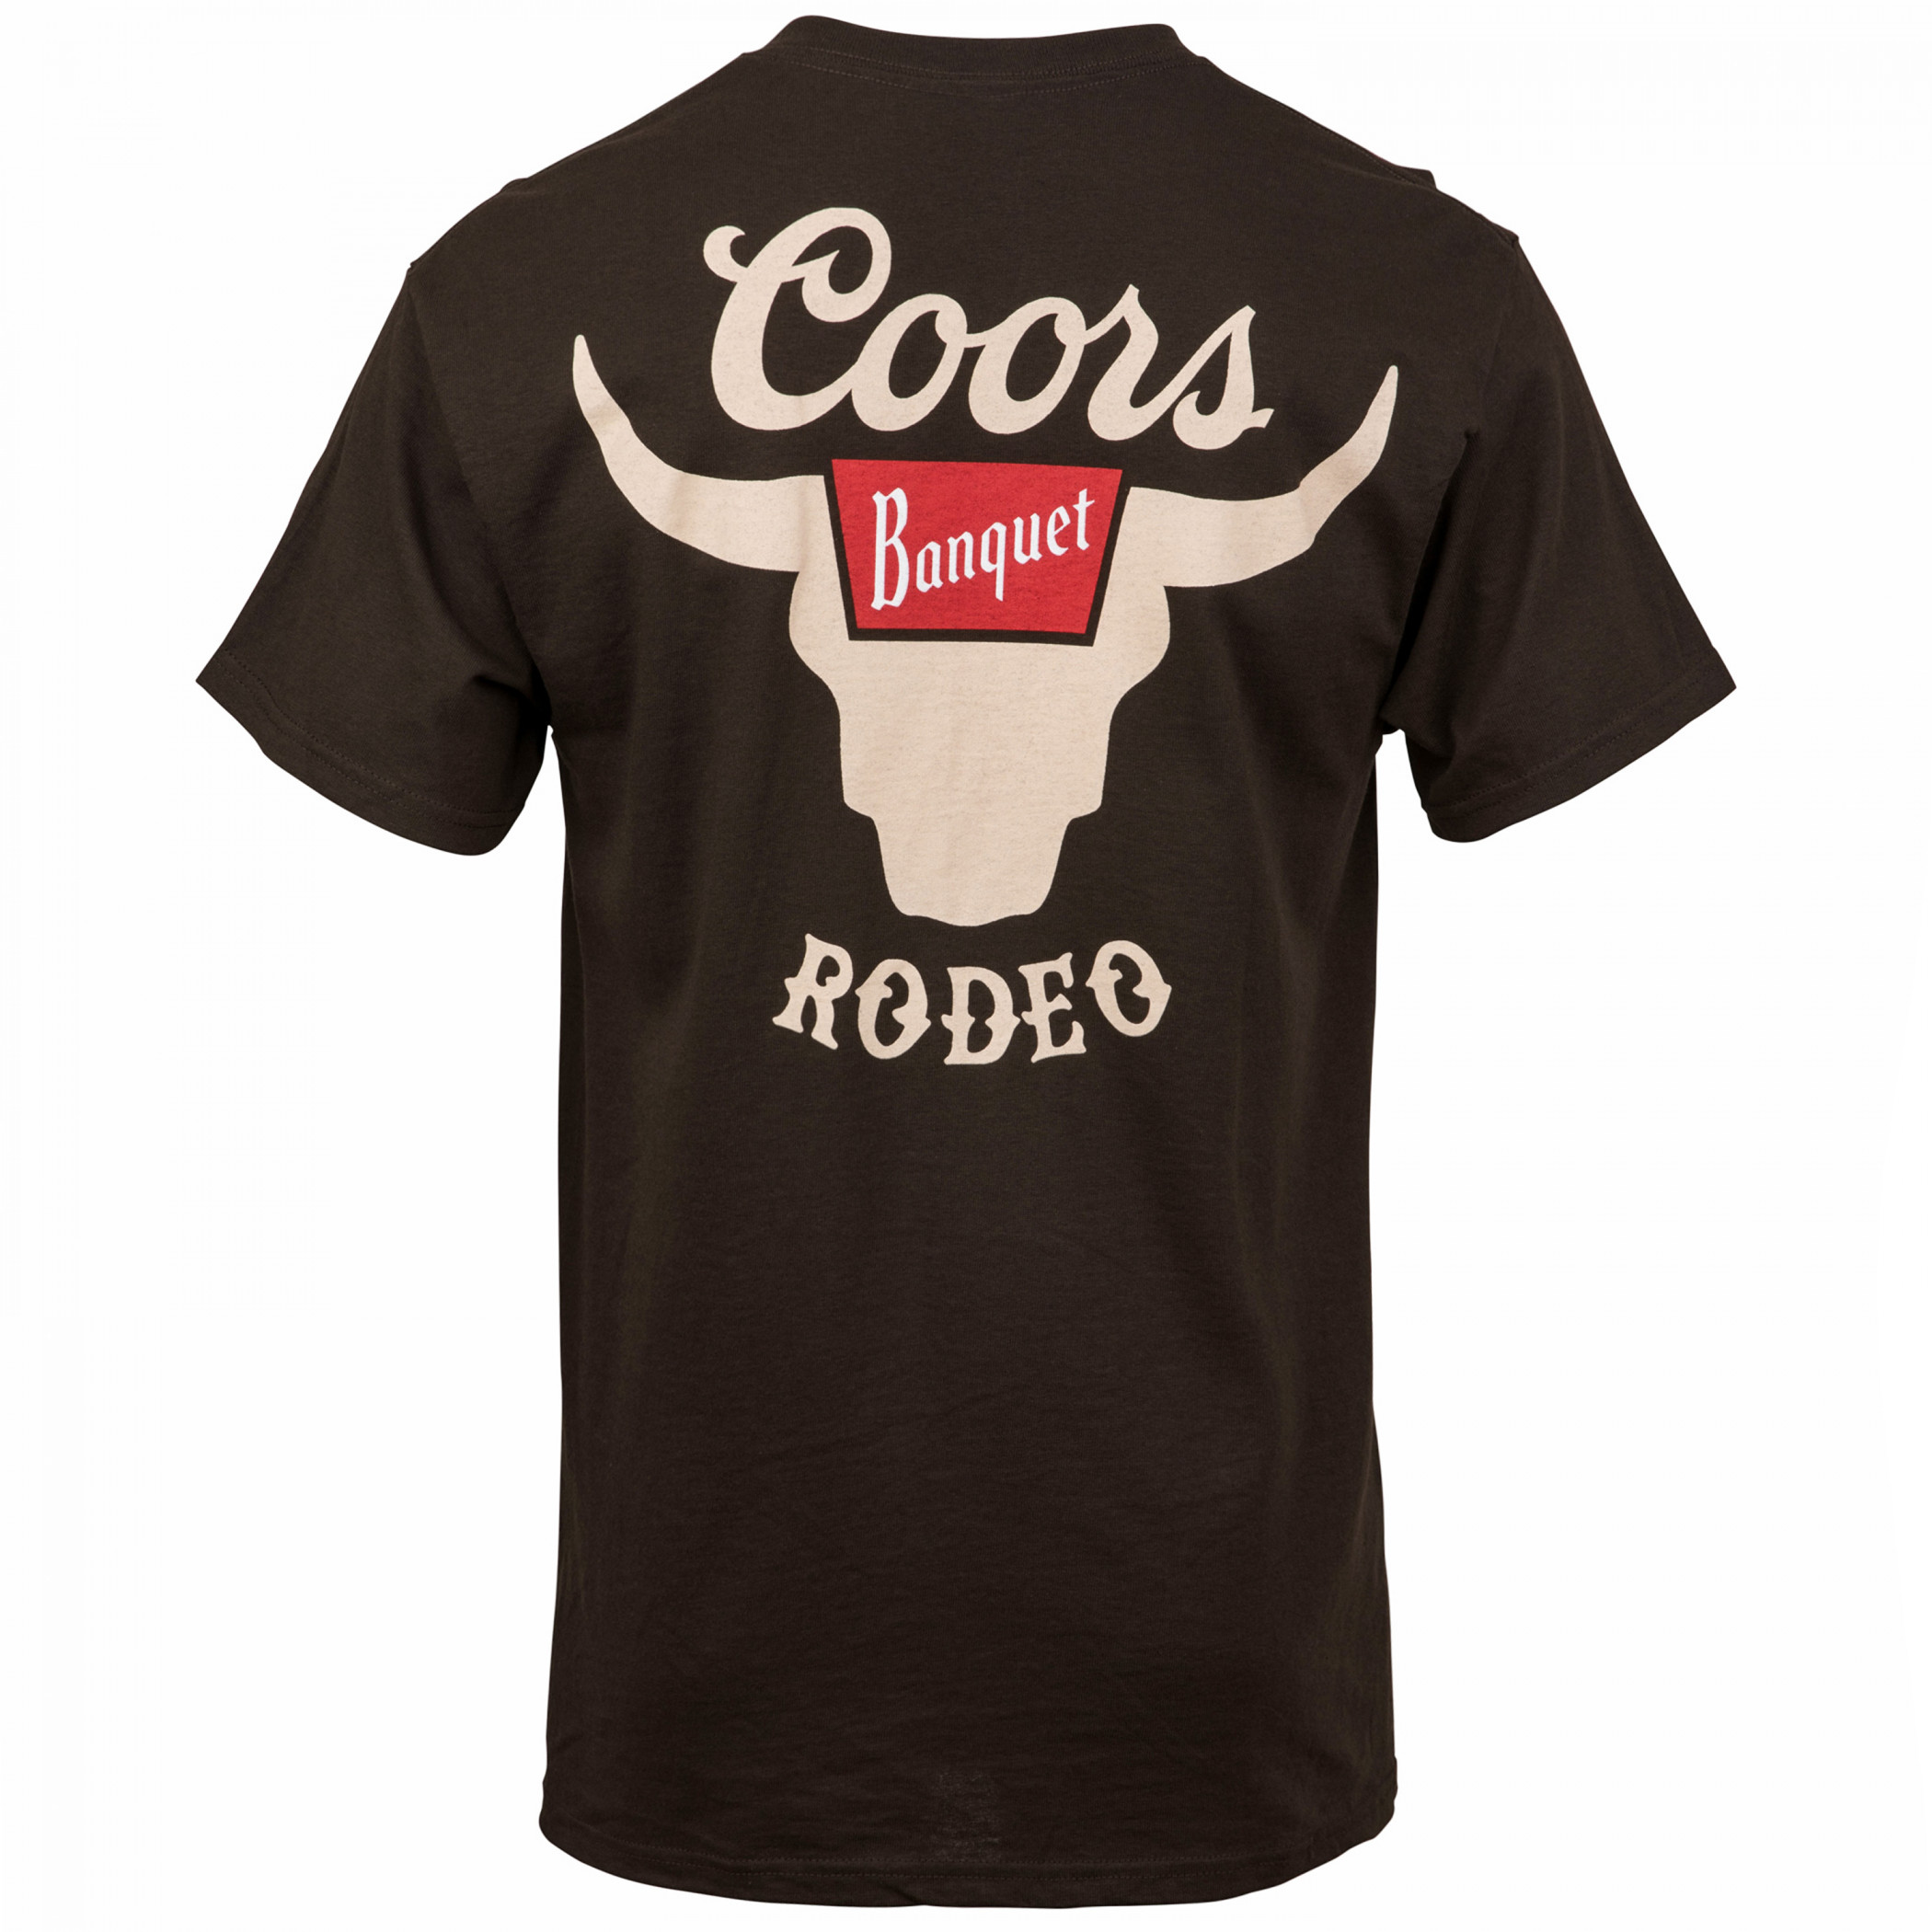 Coors Banquet Rodeo Horns Logo Brown Front and Back Print T-Shirt